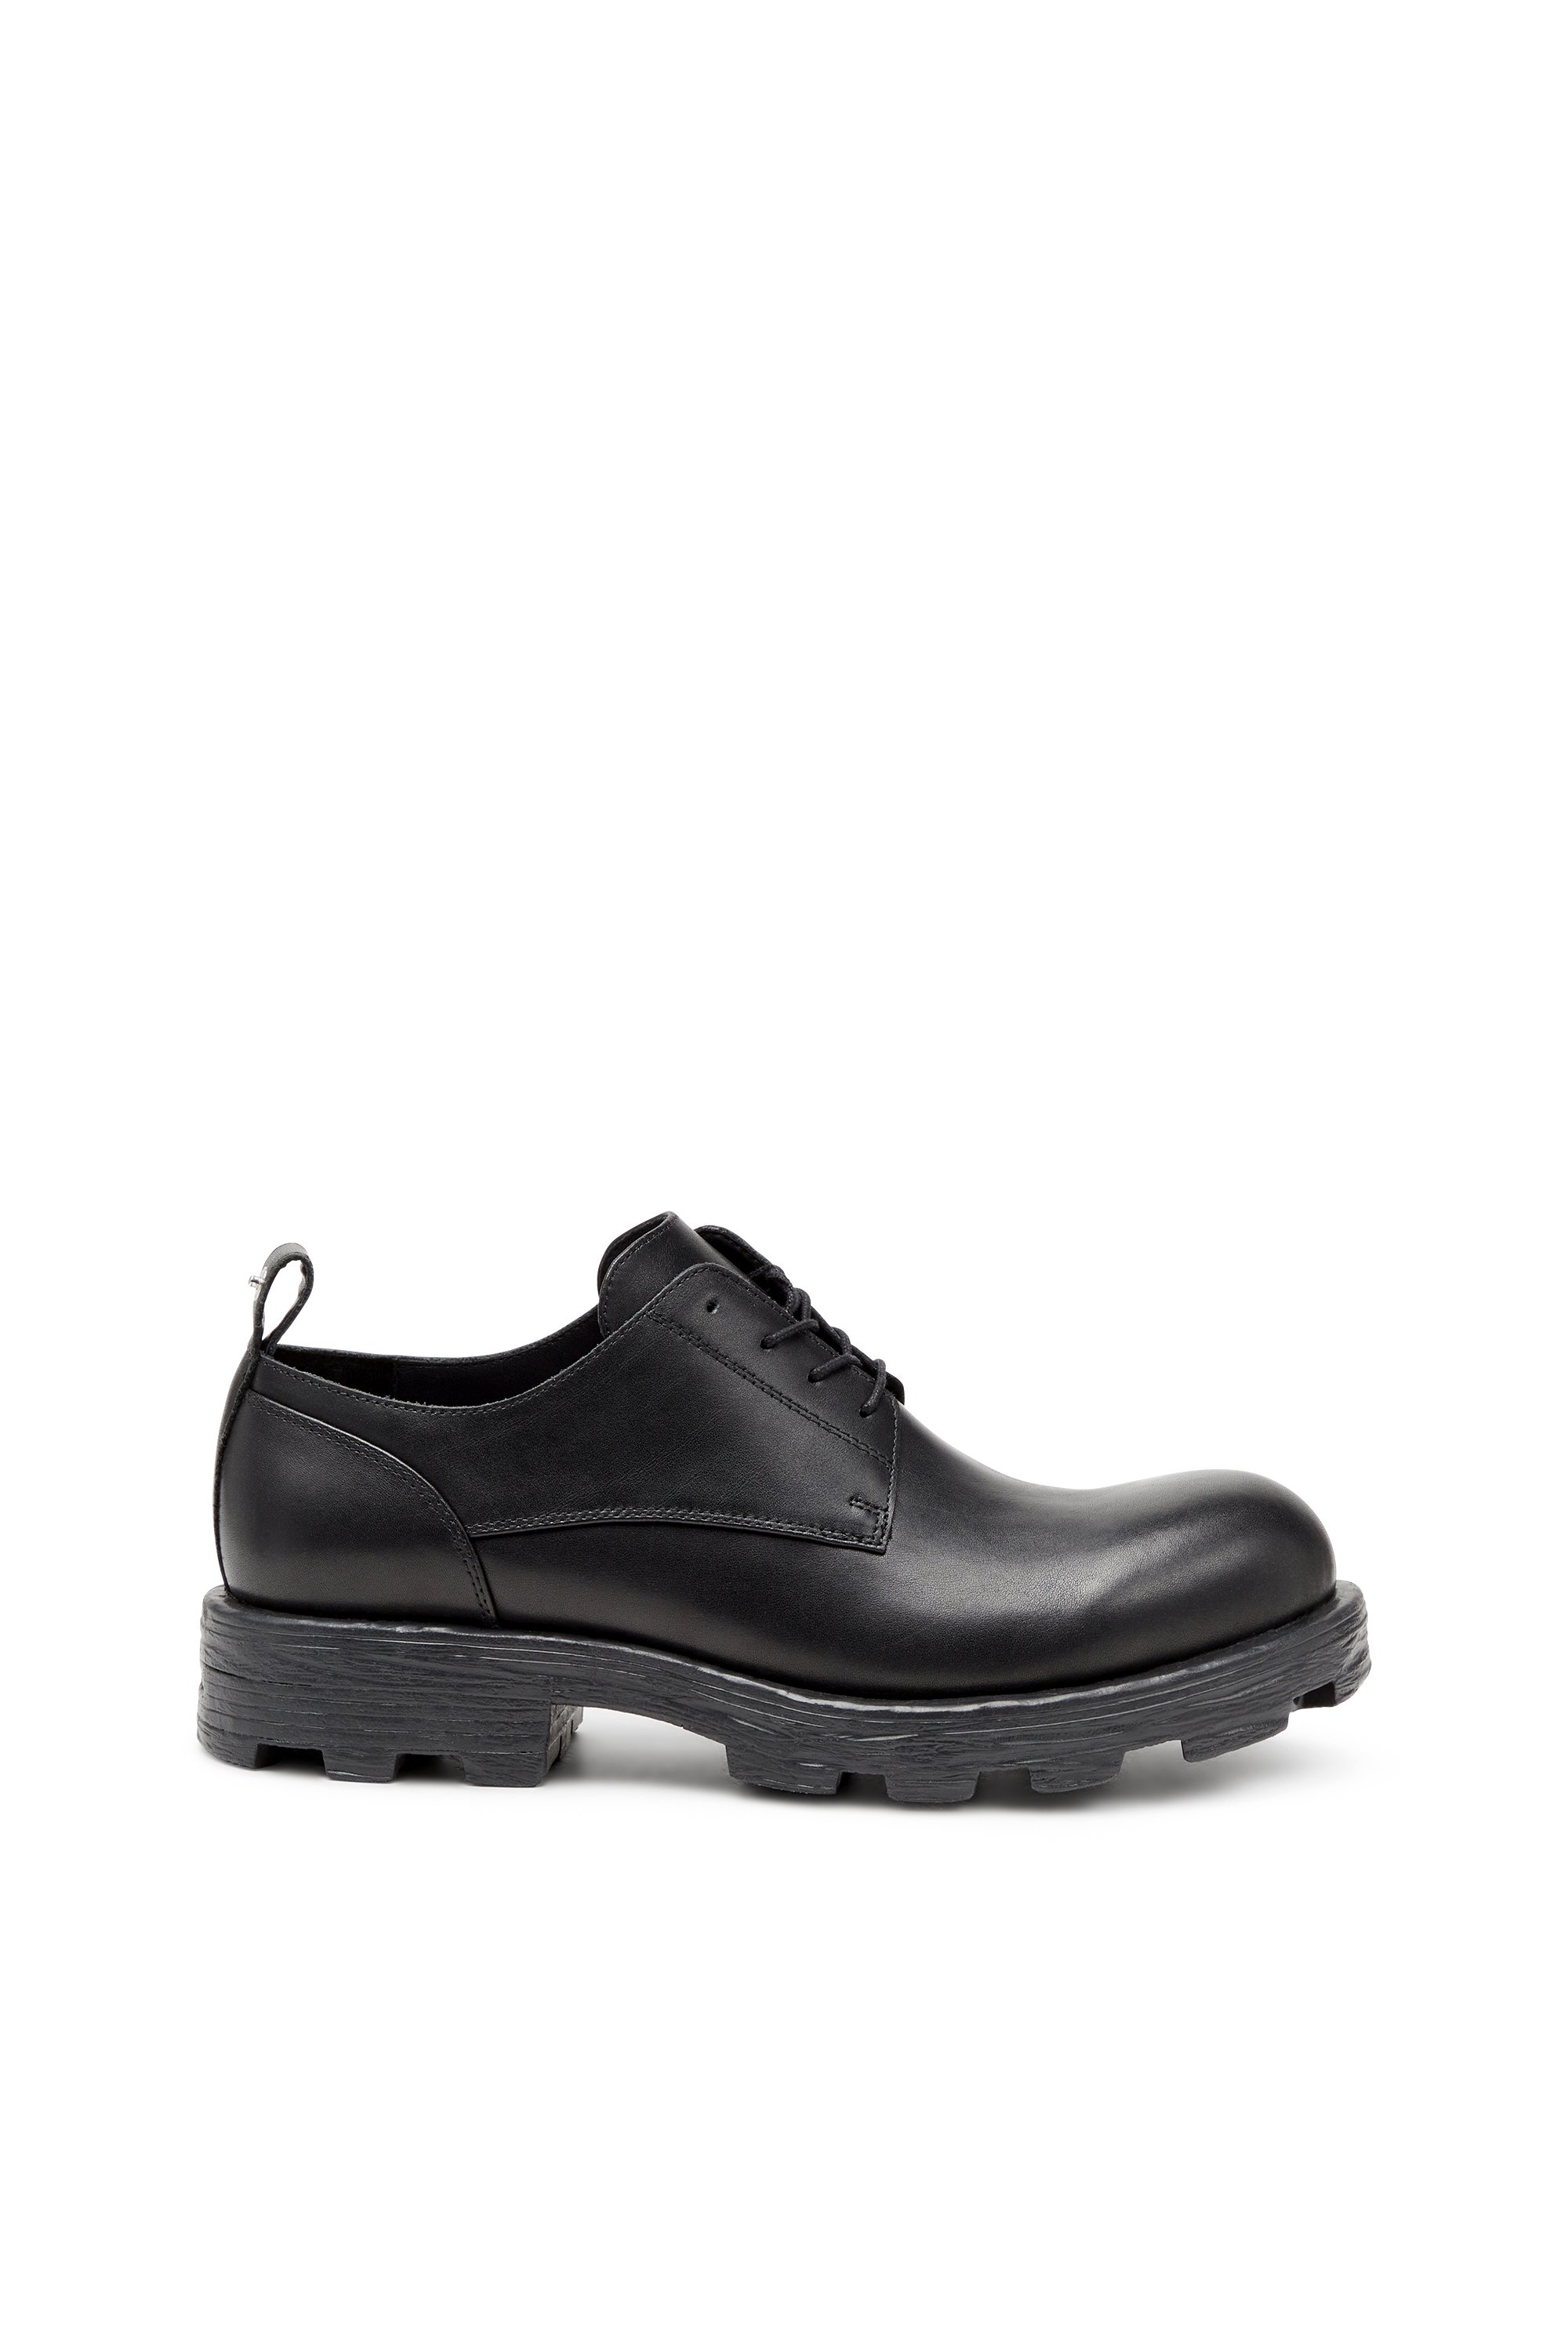 Diesel - D-HAMMER SH, Man D-Hammer-Derby shoes in textured leather in Black - Image 1